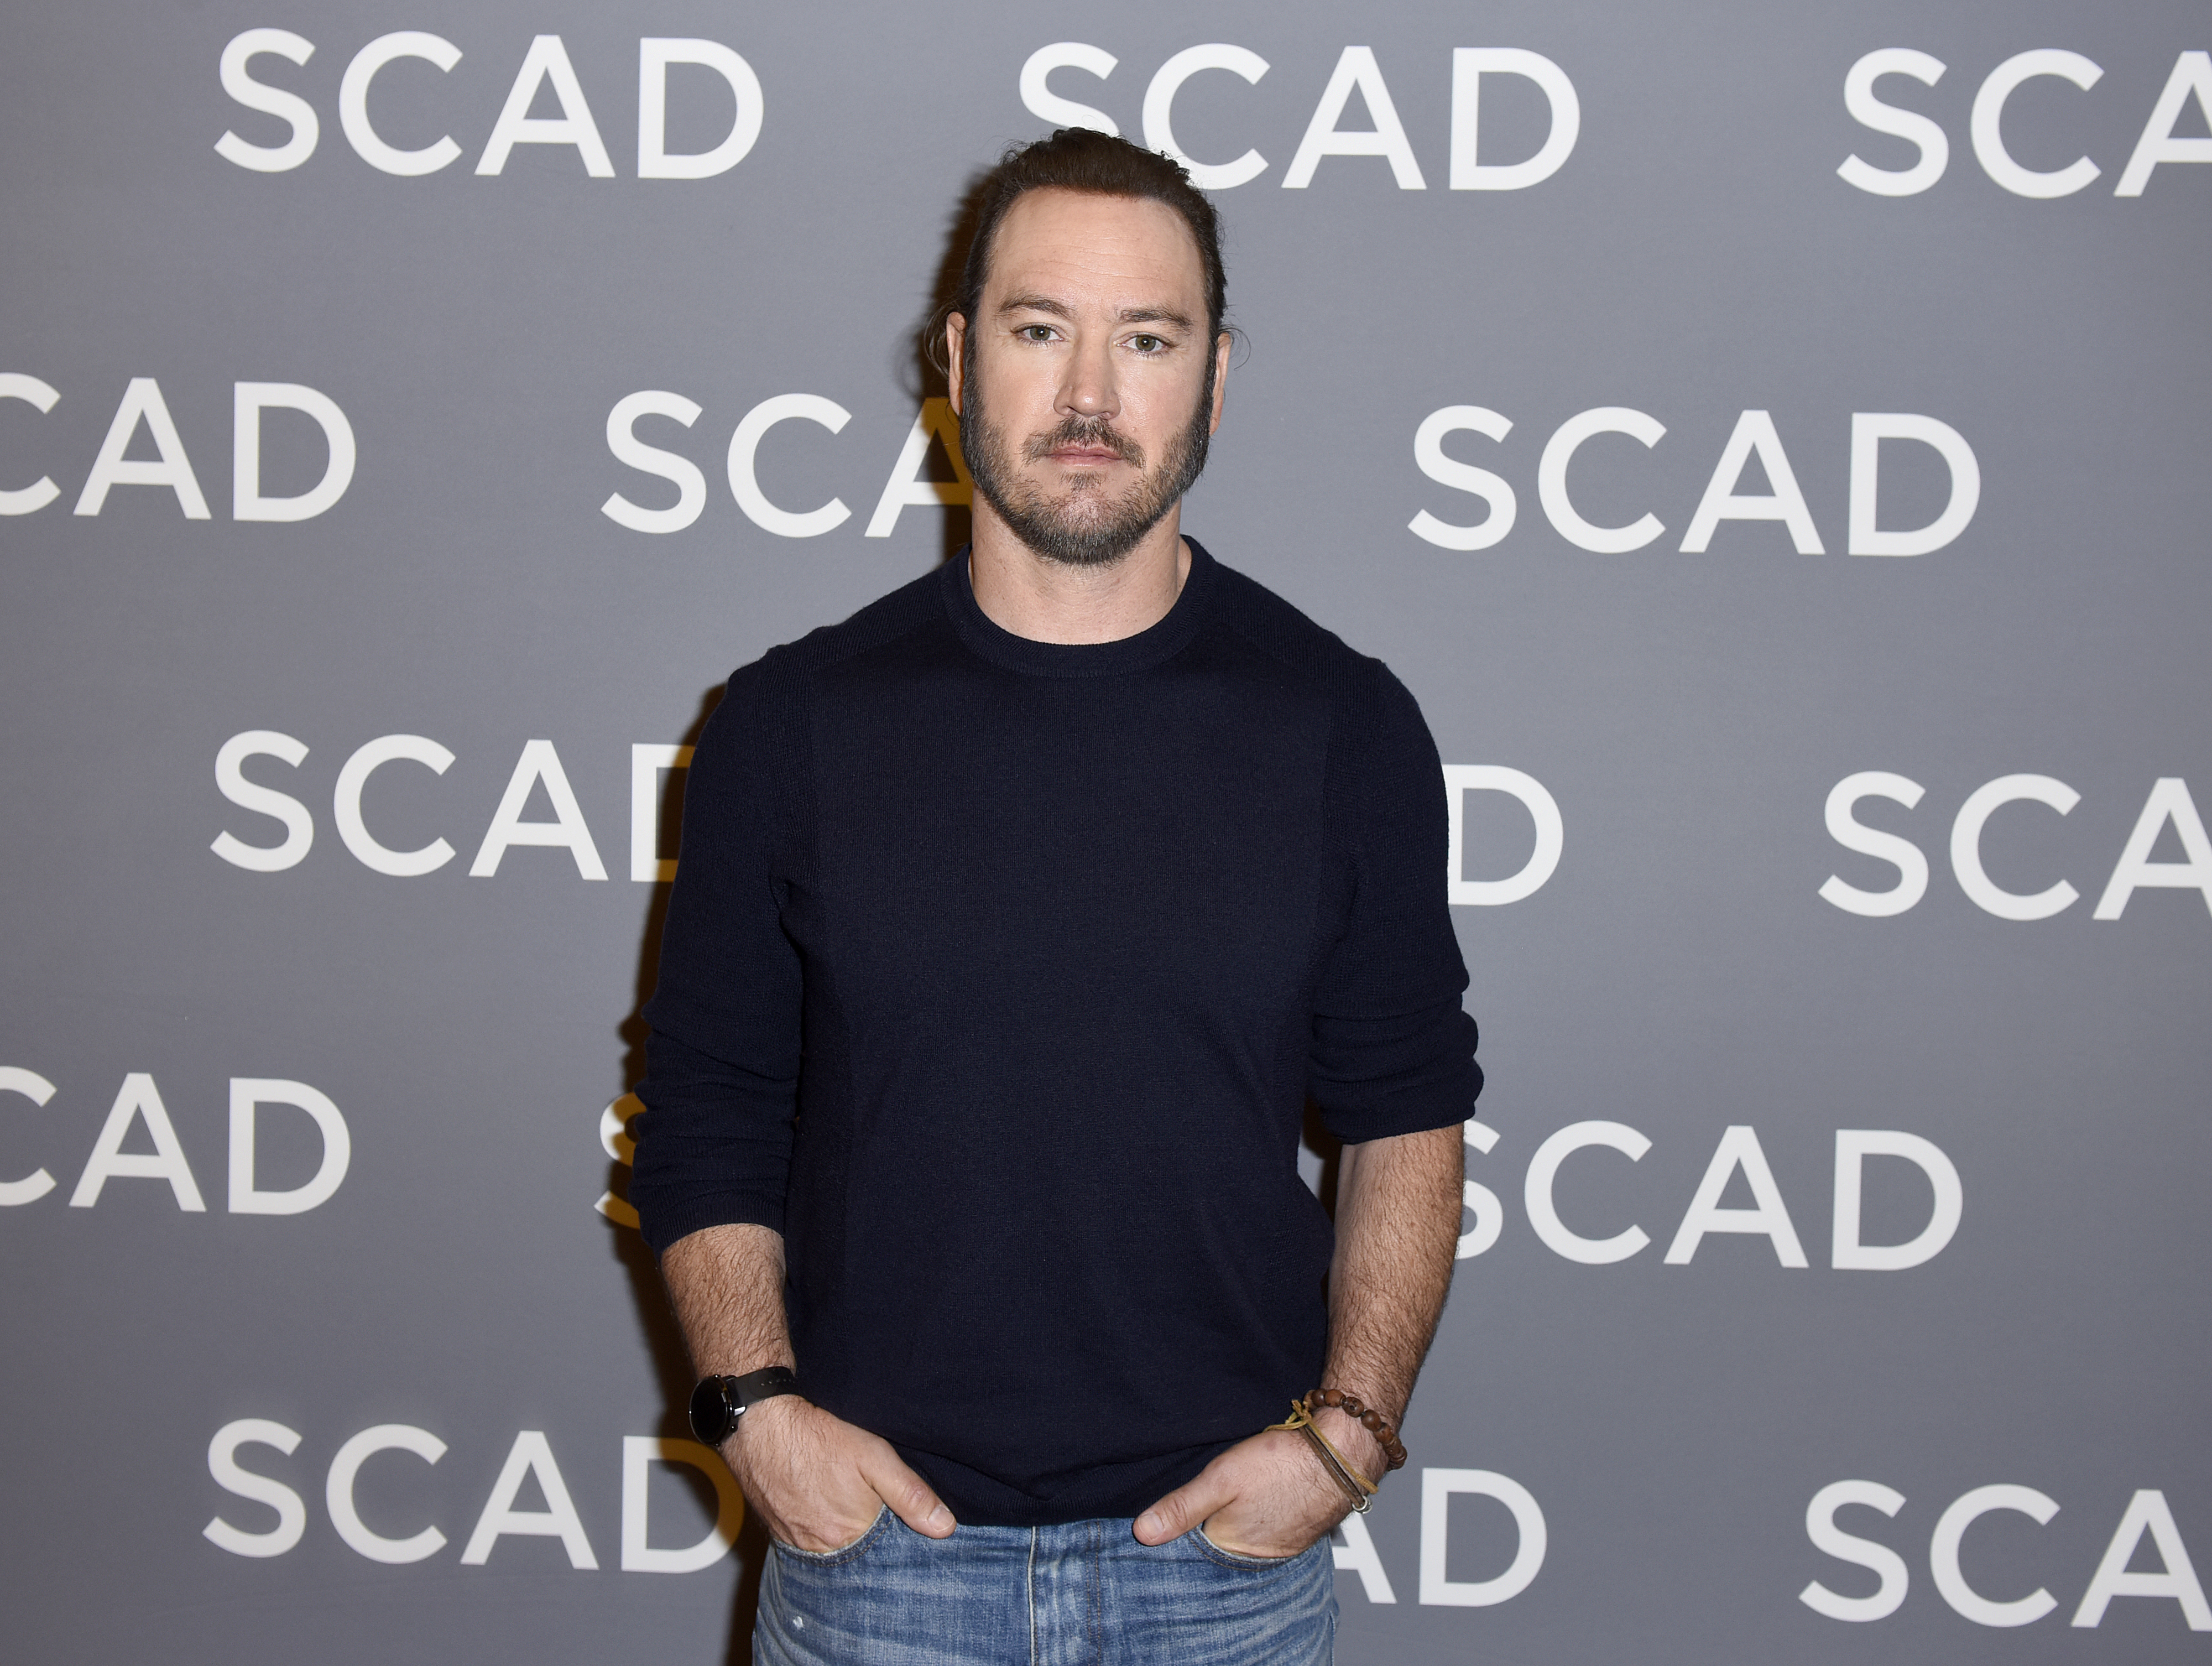 Mark-Paul Gosselaar on the red carpet with his hands in his jeans pockets